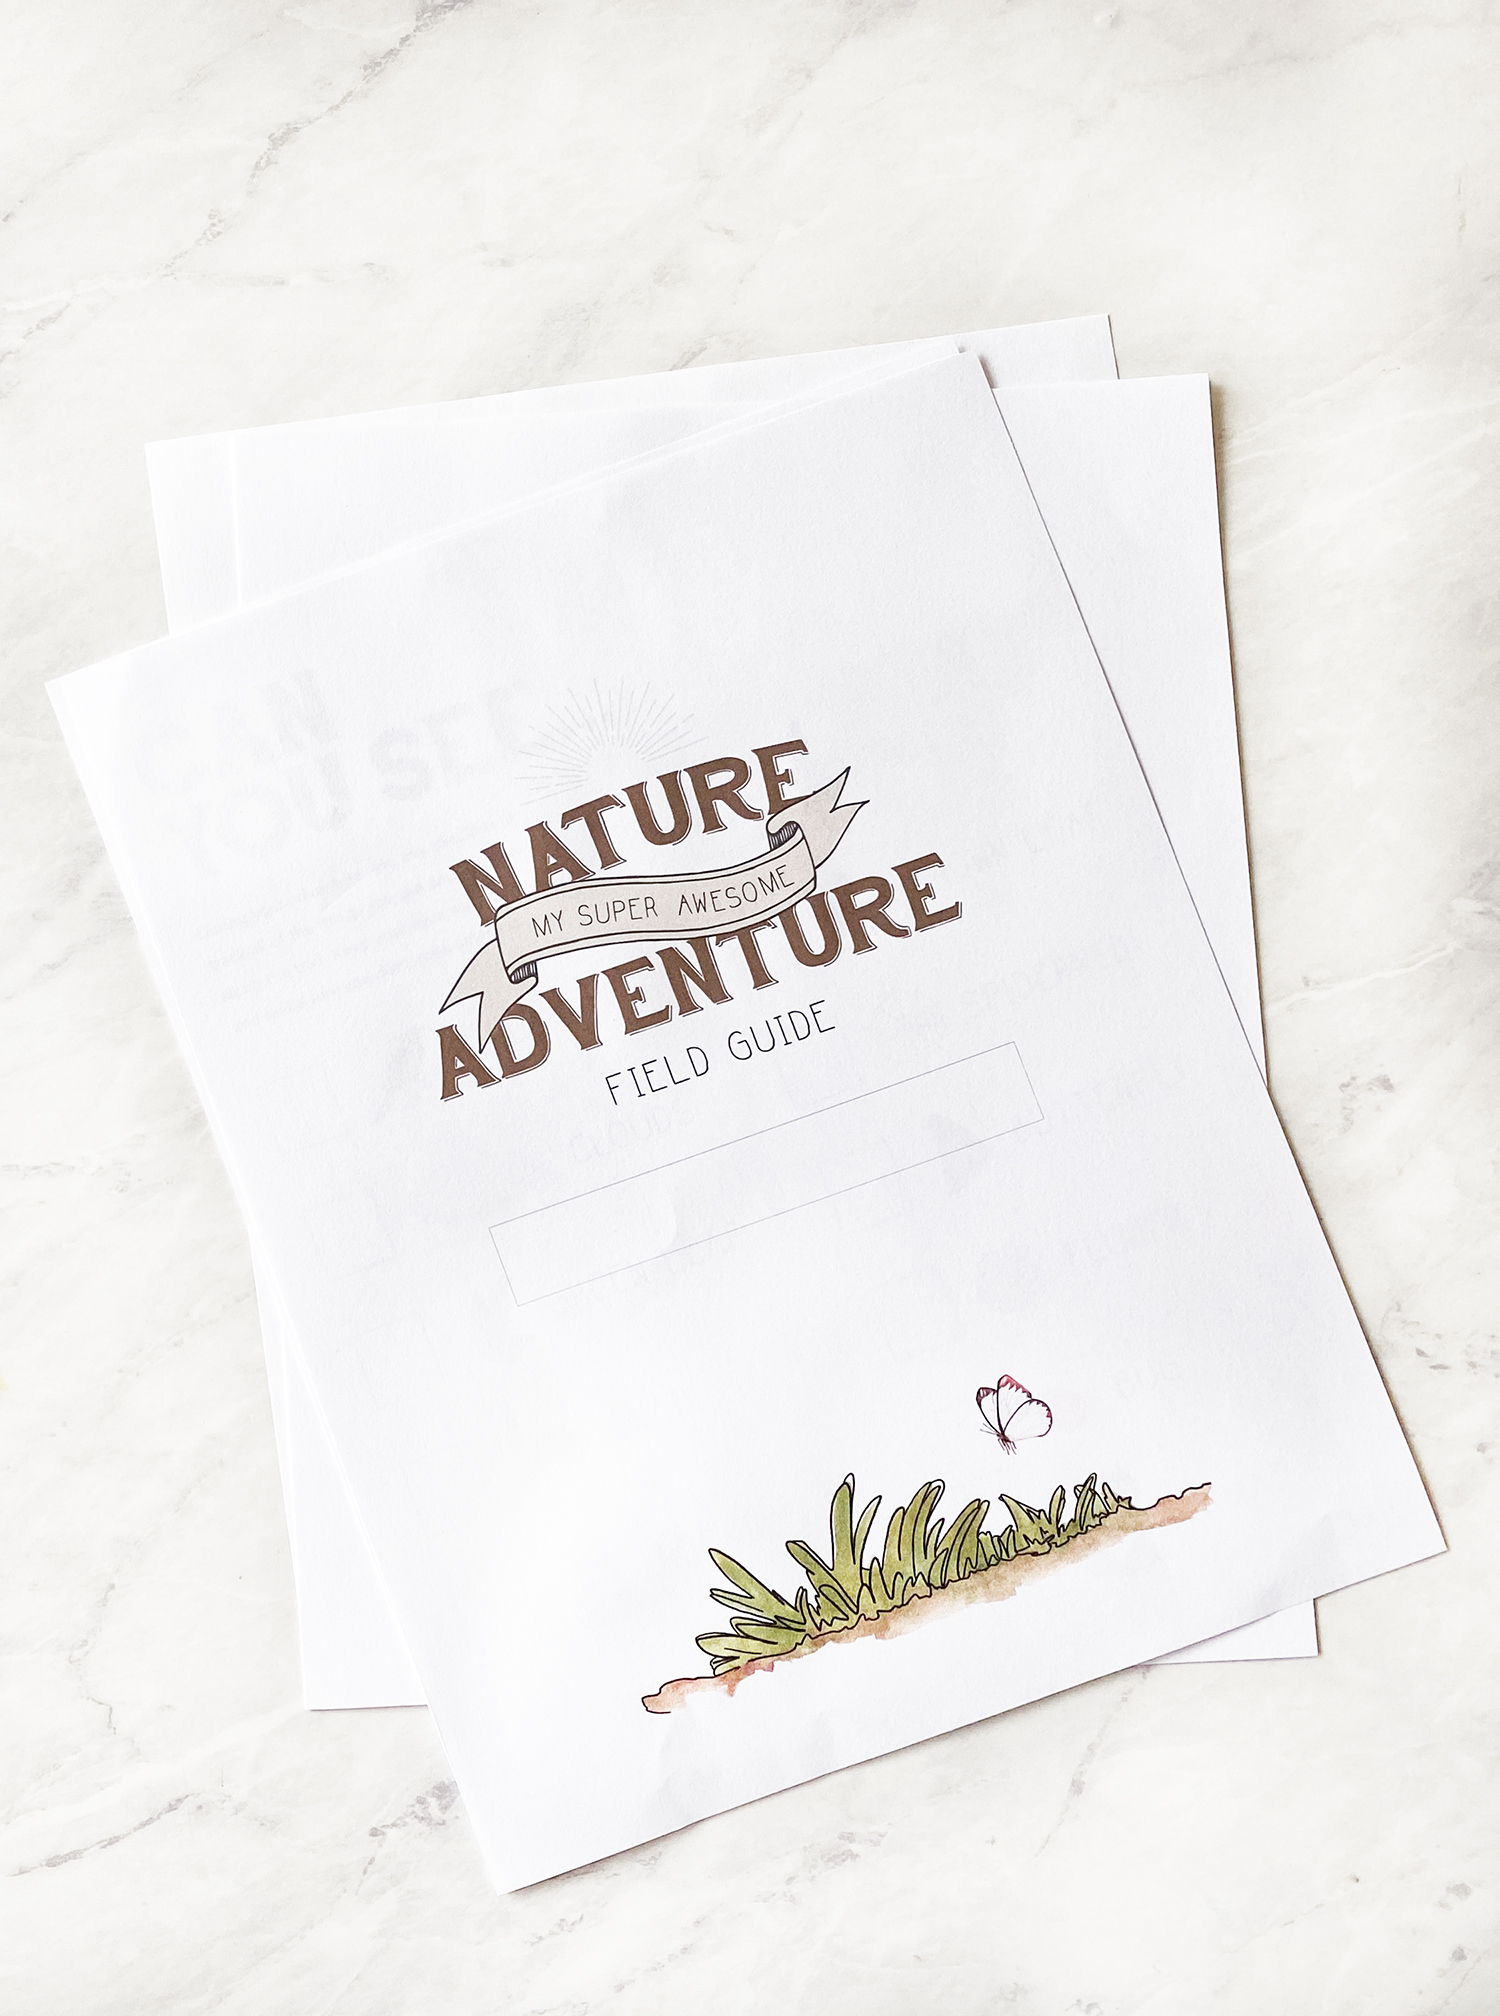 Nature activity for the kids and printable field guide. Nothing beats being out in nature. This is a fun family activity for the kids to enjoy being outside, exploring, and getting dirty. Get the free printable field guide over on KaraLayne.com! #NatureActivity #NatureWalk #NatureActivityForKids #FreePrintablesForKids #NatureFieldGuide #GetOutdoors #HomeschoolActivityIdeas #HomeschoolIdeas #FamilyActivitiesAtHome #Outdoors